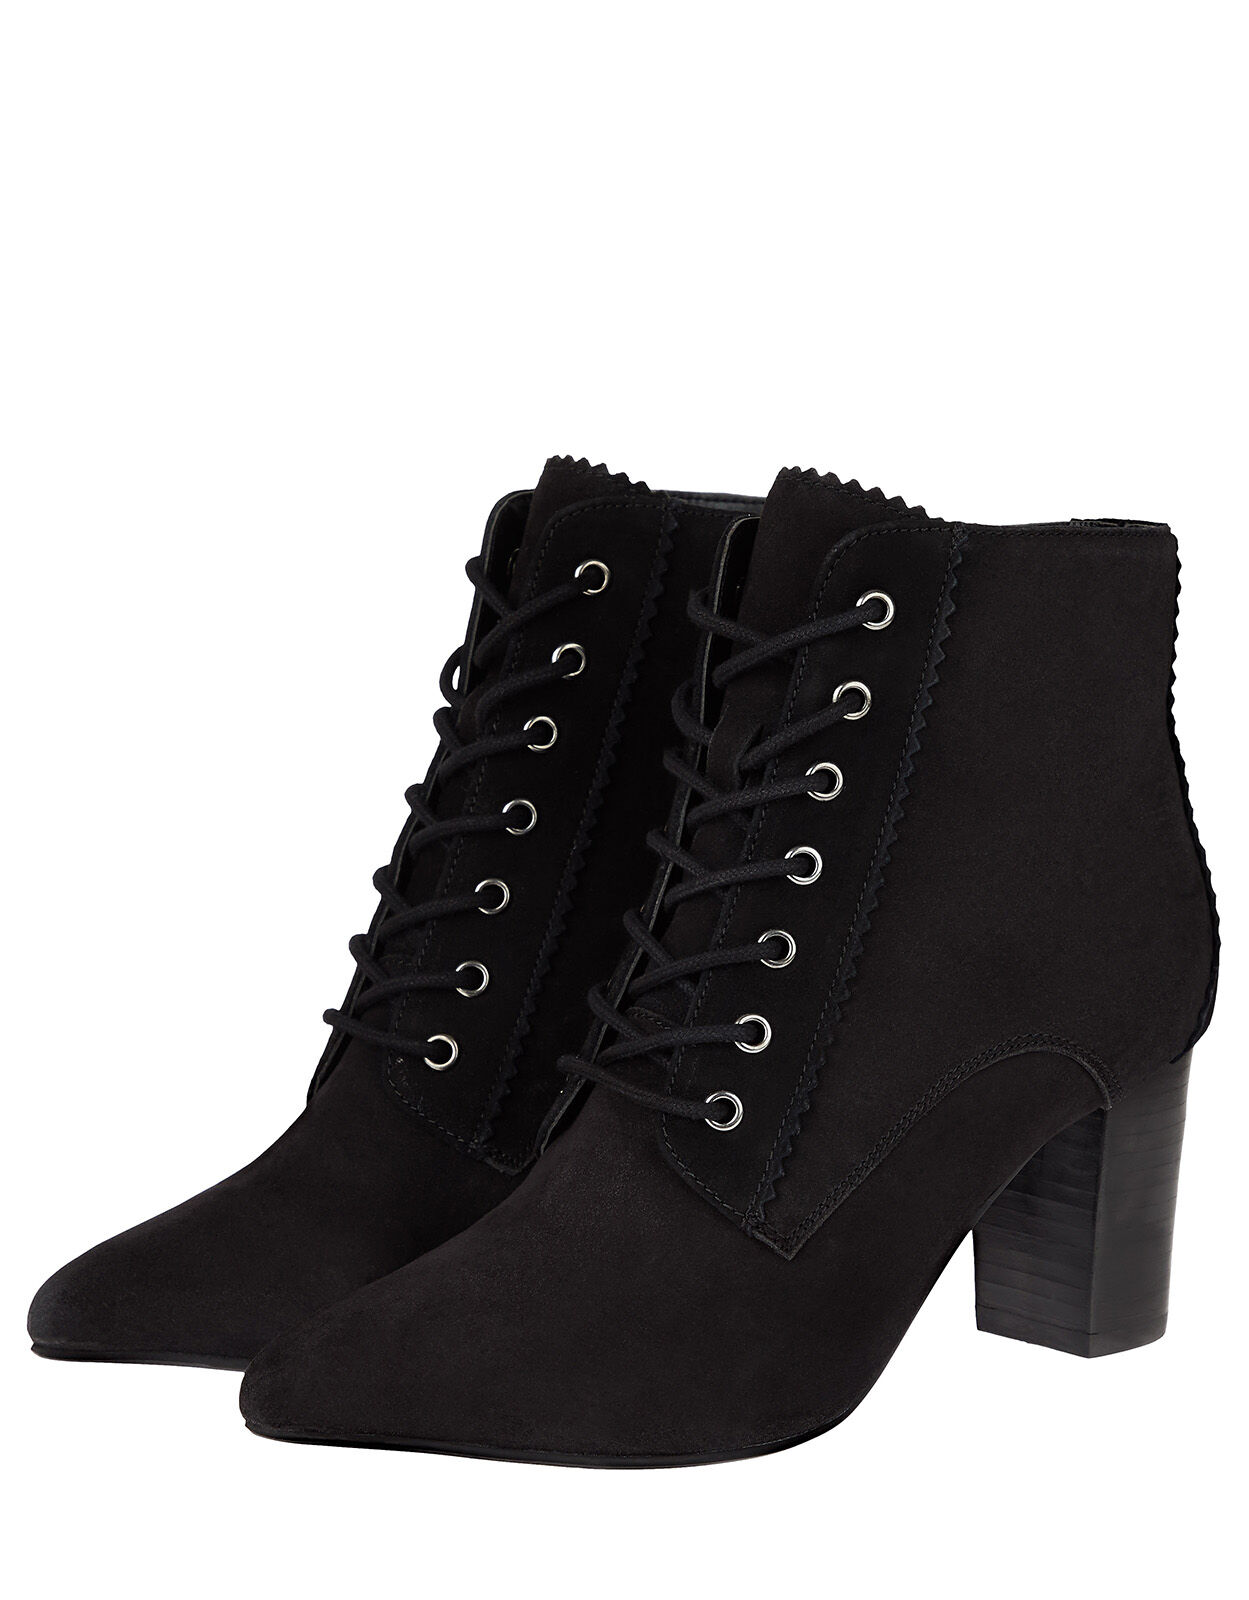 lace up womens boots uk